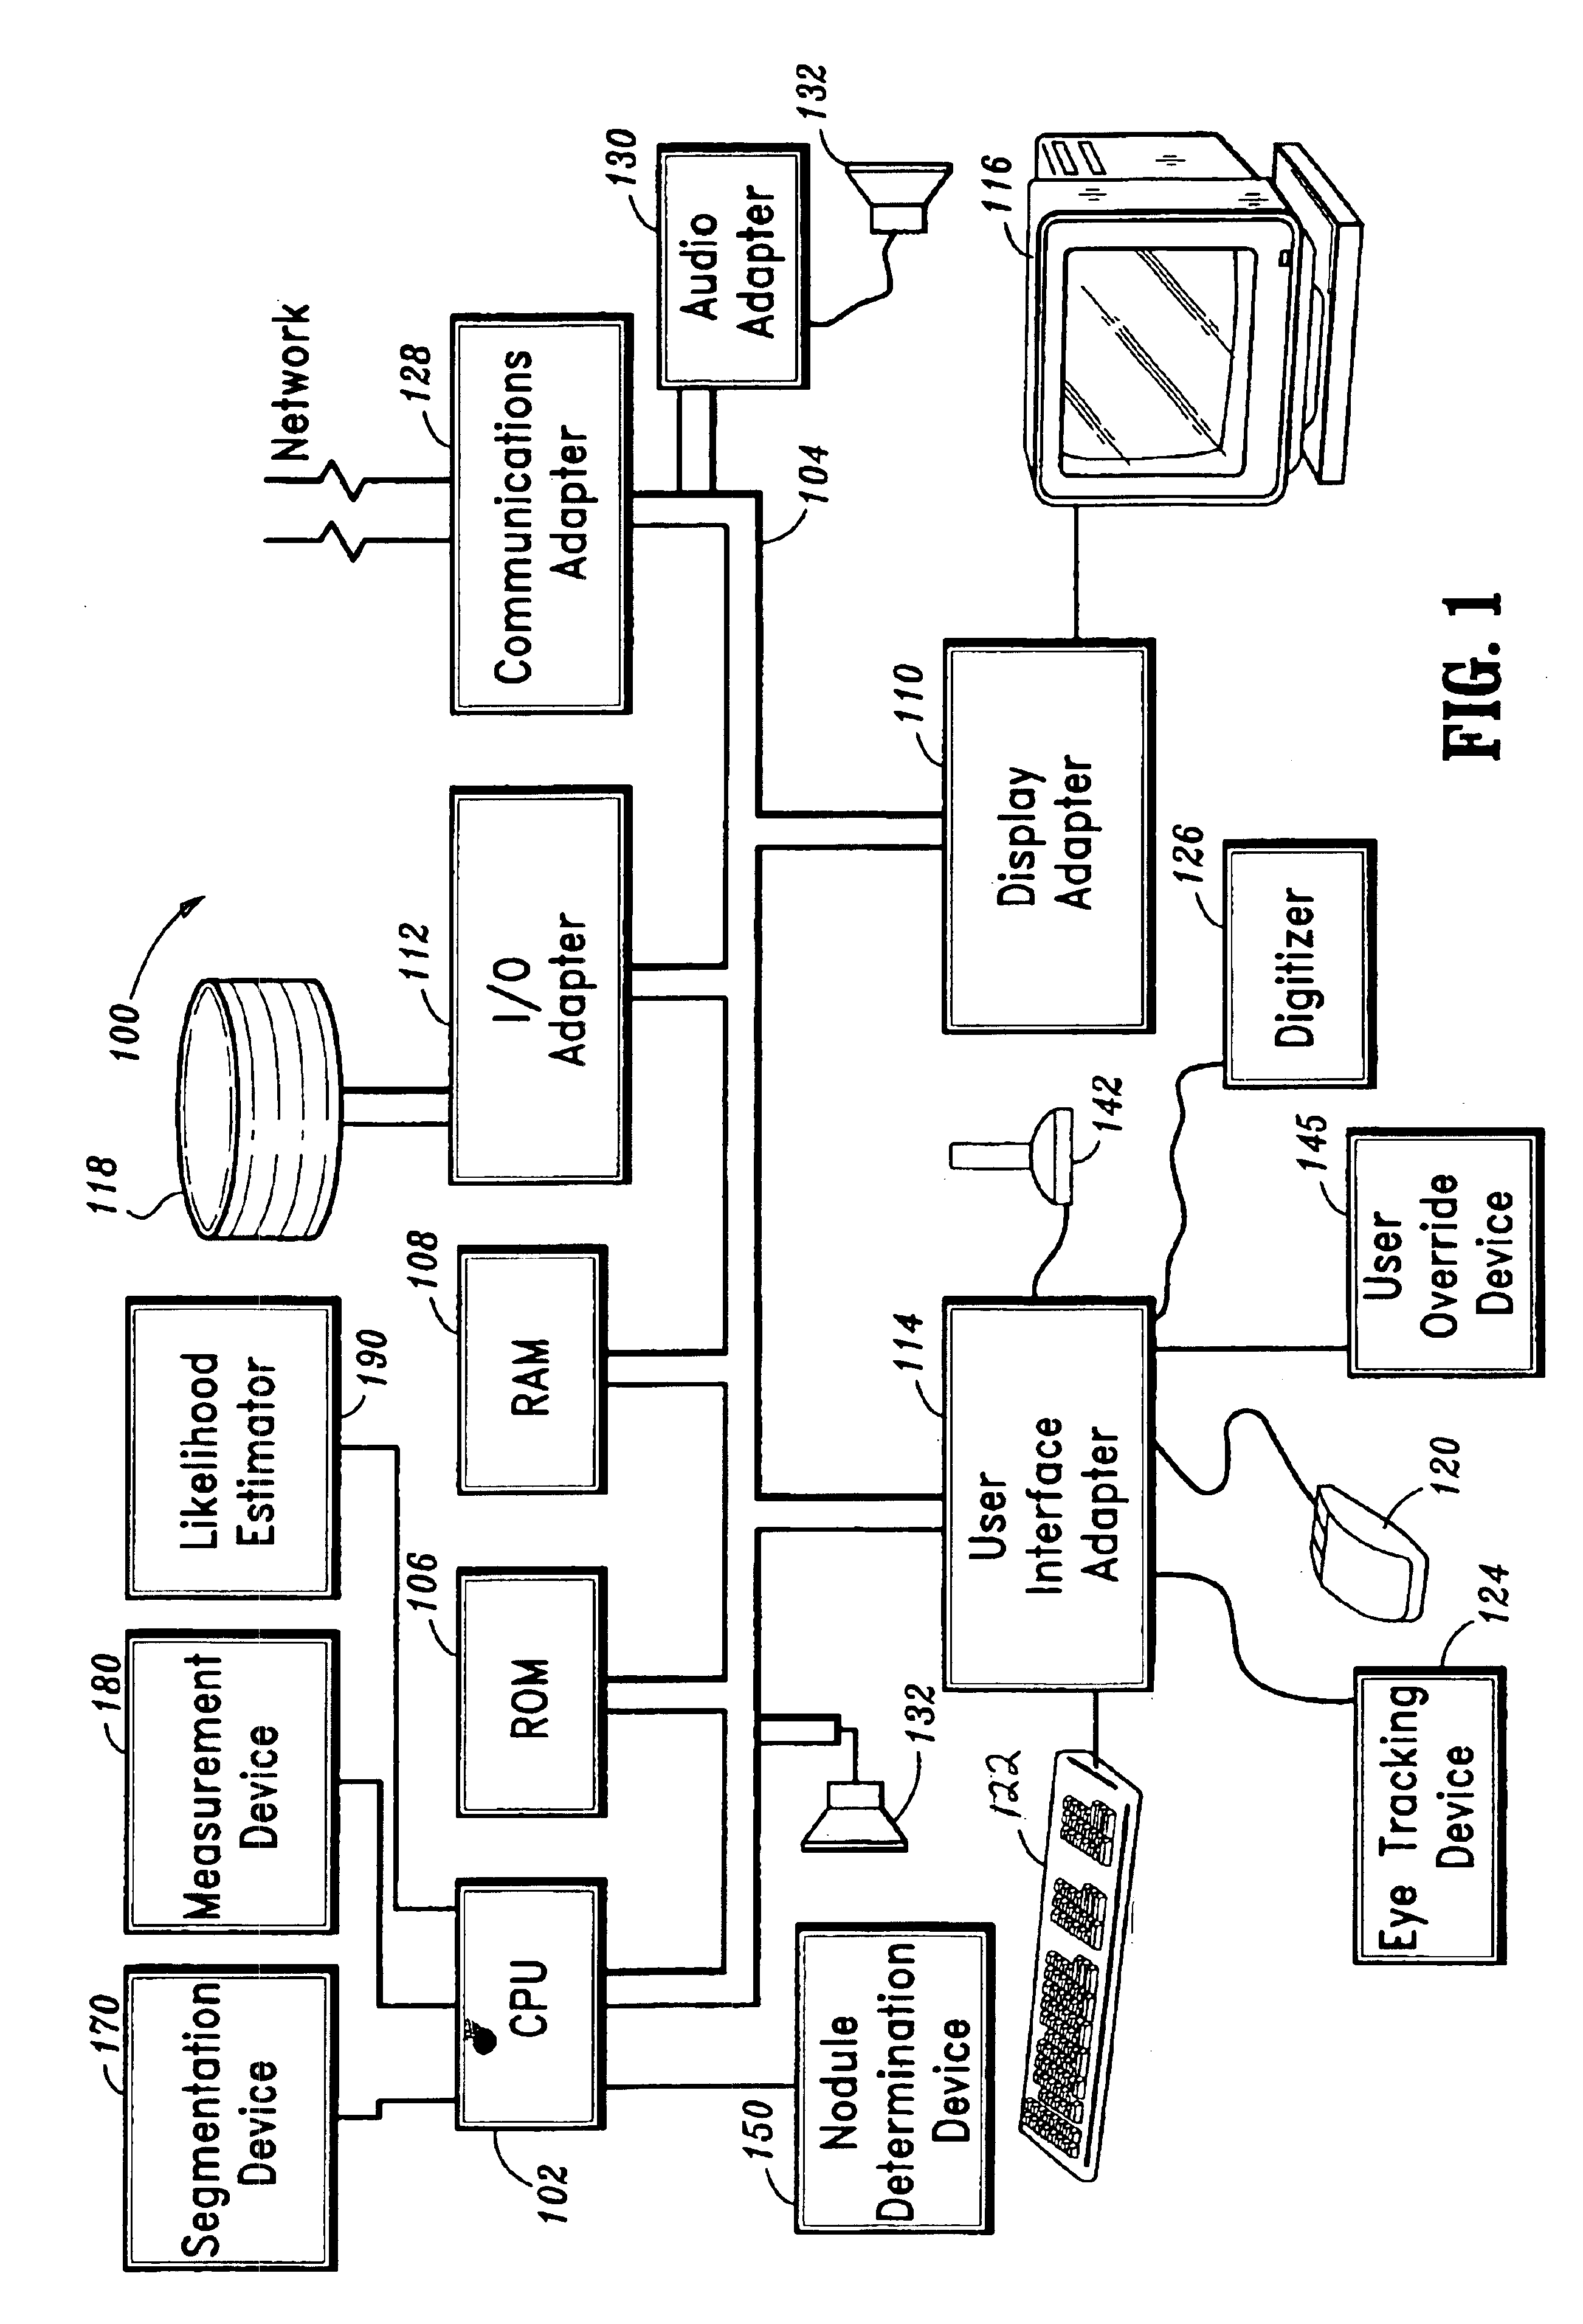 Interactive computer-aided diagnosis method and system for assisting diagnosis of lung nodules in digital volumetric medical images